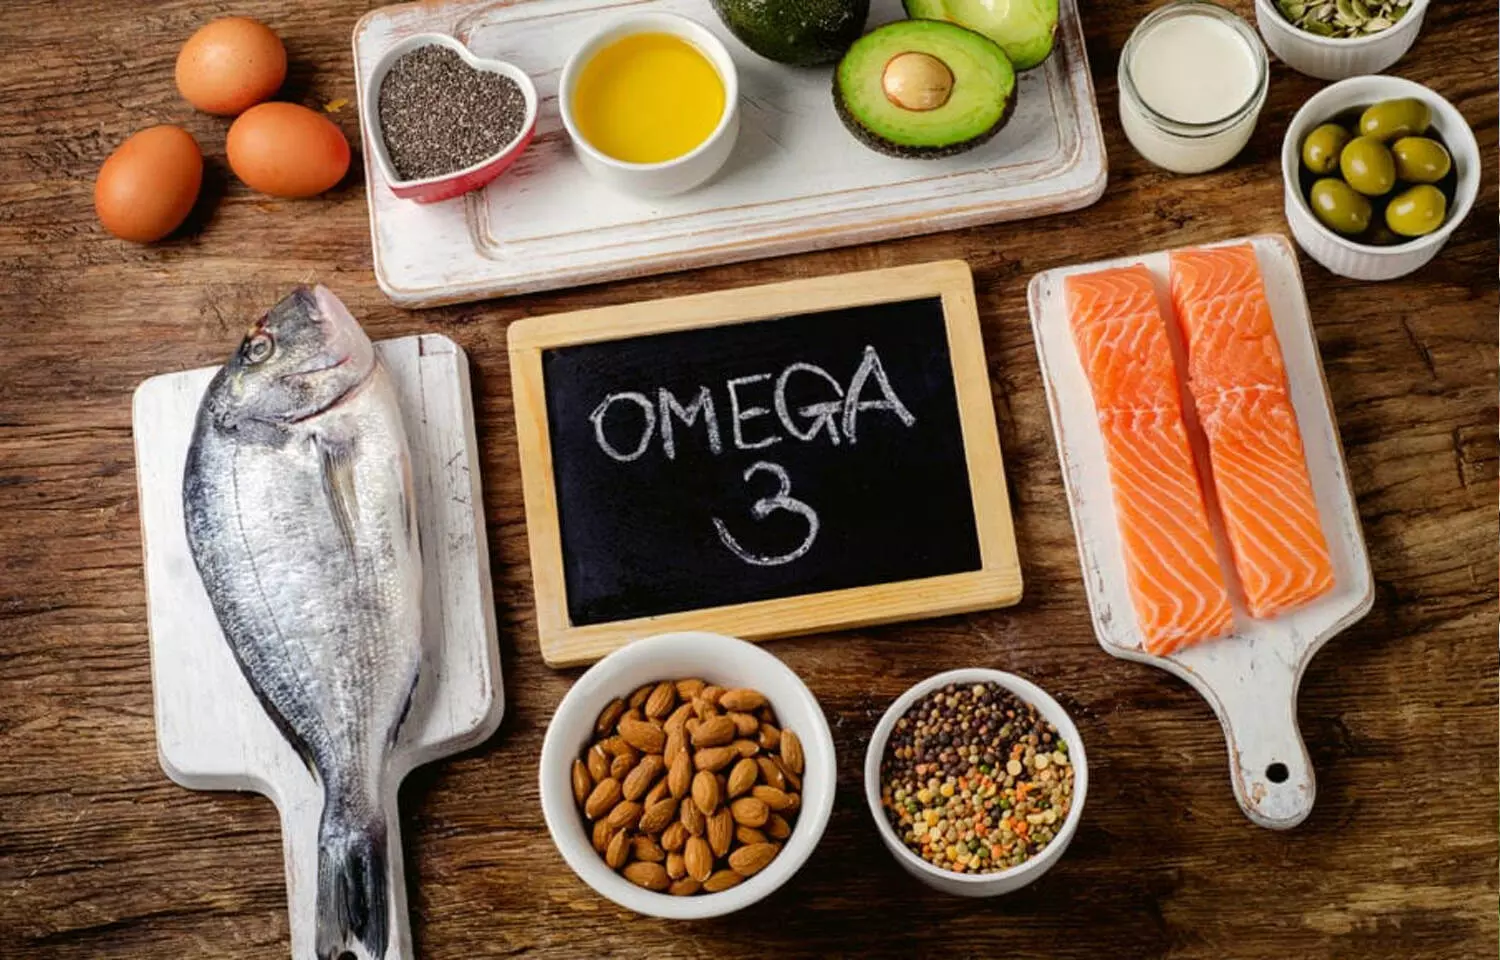 Consumption of high omega 3 diets reduce severity and frequency of headache: BMJ